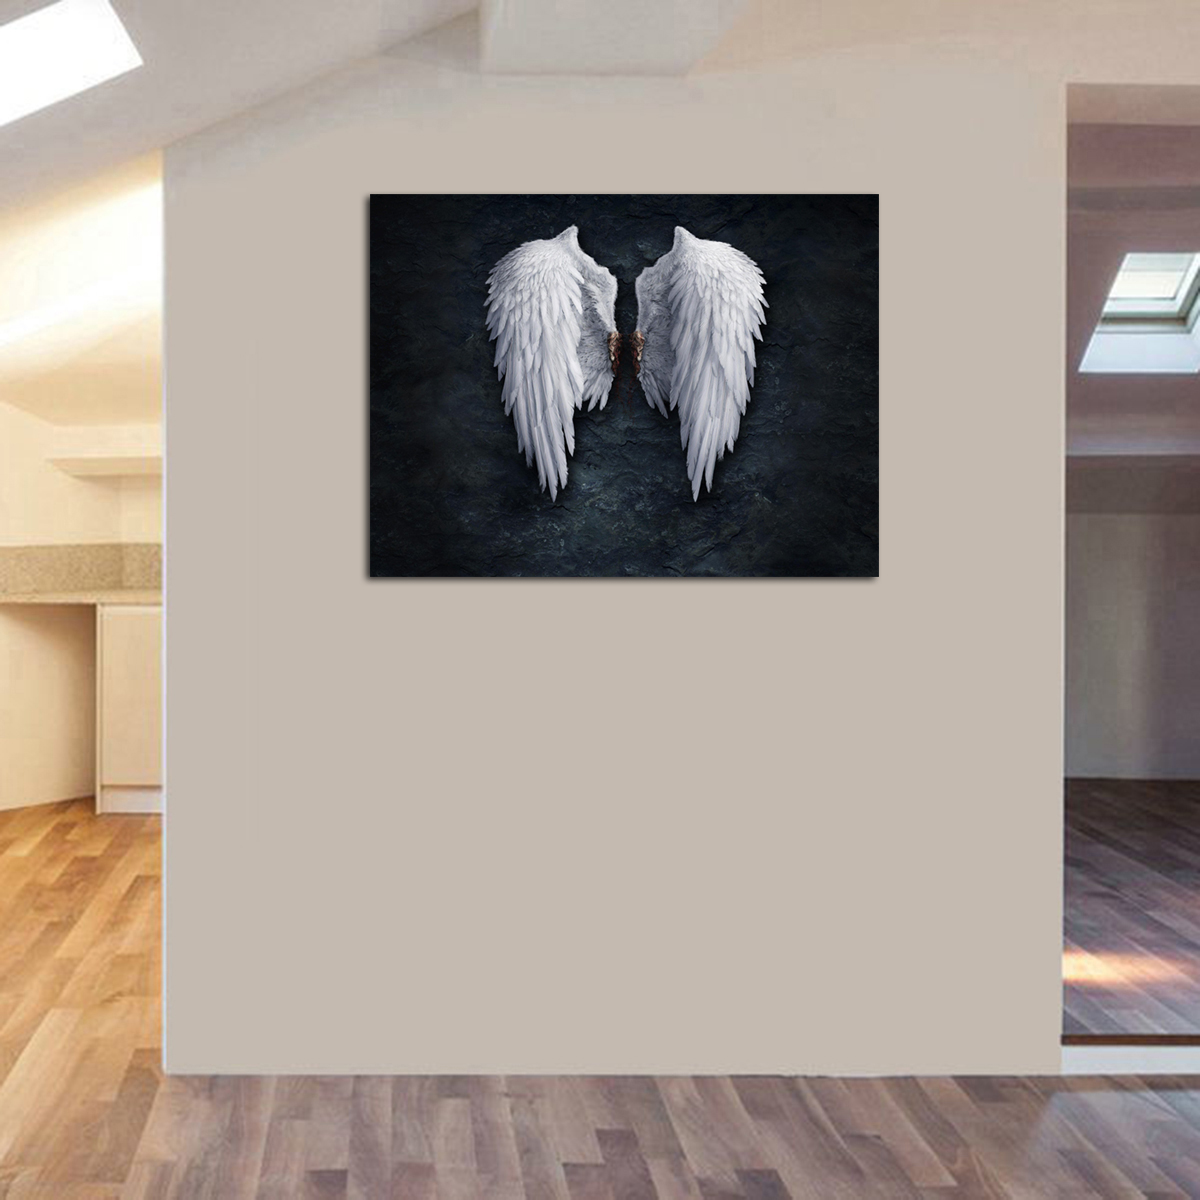 1Pc-Wall-Decorative-Painting-Angel-Wings-Canvas-Print-Wall-Decor-Art-Pictures-Frameless-Wall-Hanging-1725089-4